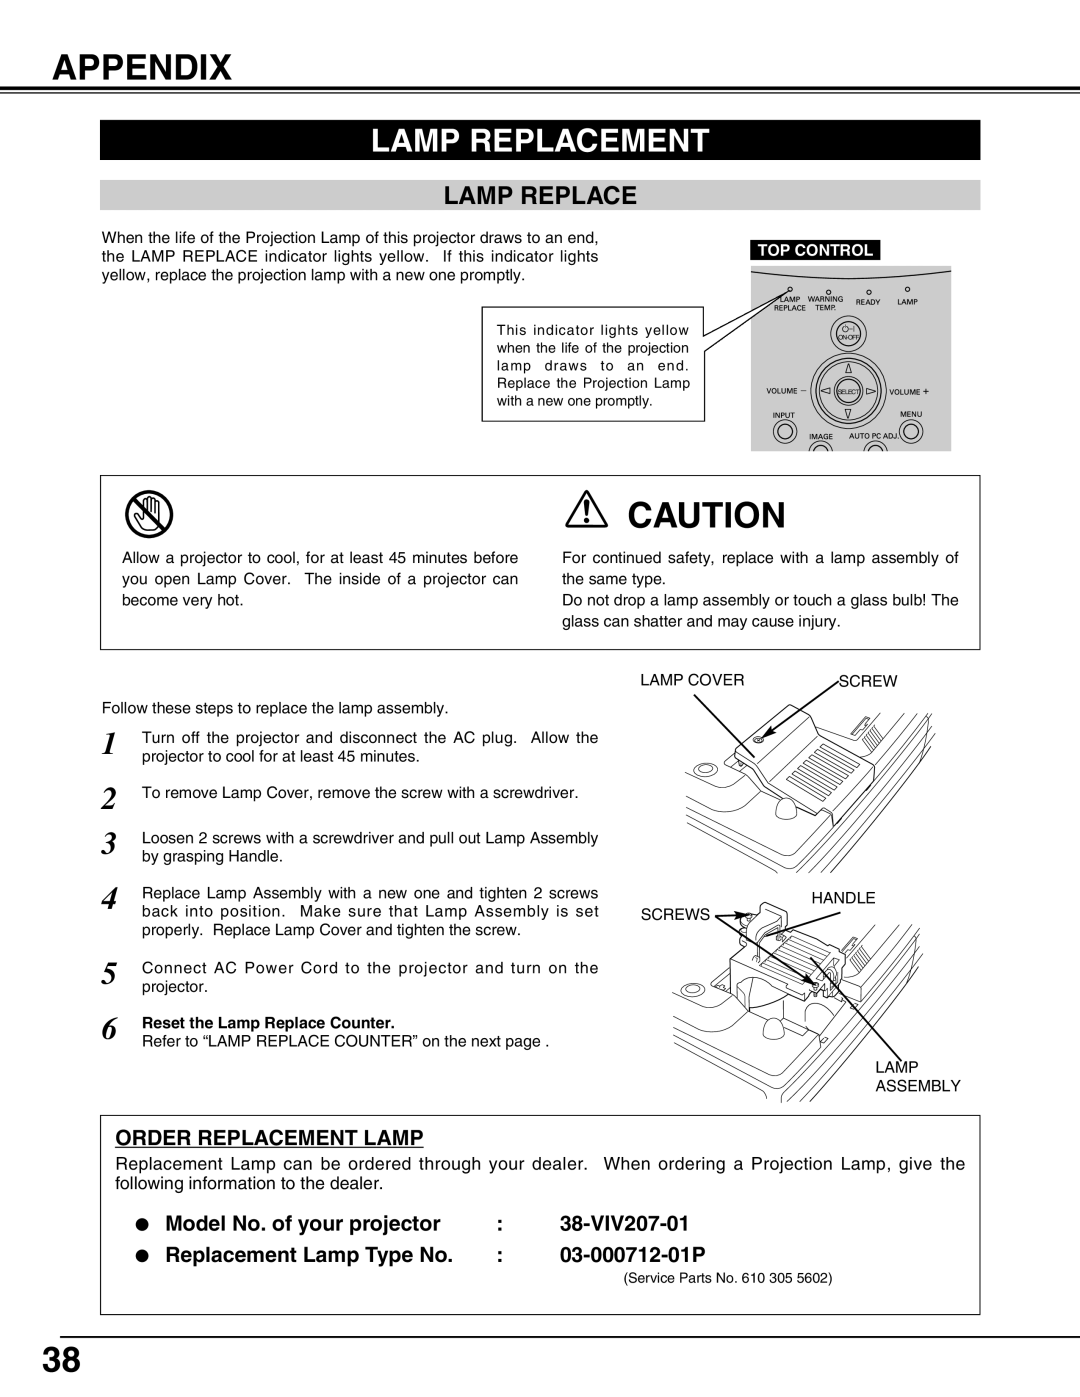 Christie Digital Systems 38-VIV207-01 user manual Appendix, Lamp Replacement, 03-000712-01P, Reset the Lamp Replace Counter 